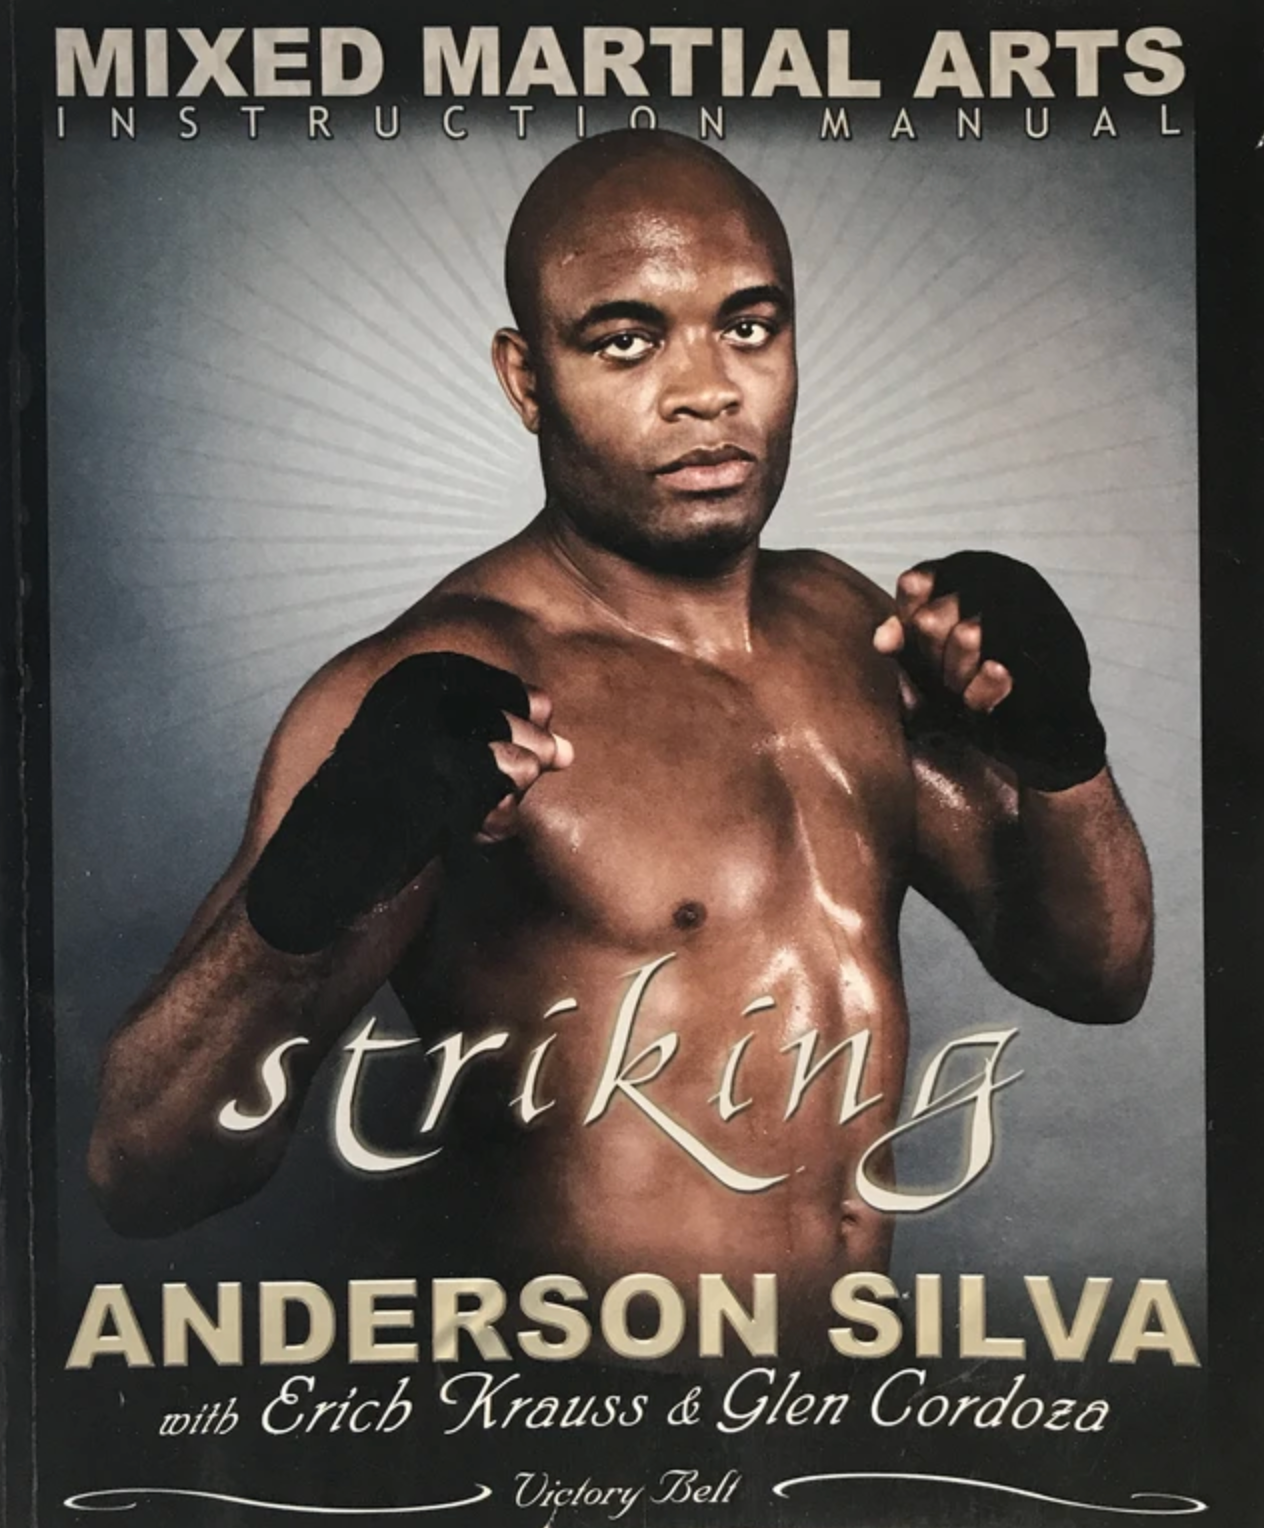 The Mixed Martial Arts Instruction Manual: Striking Book by Anderson Silva (Preowned) - Budovideos